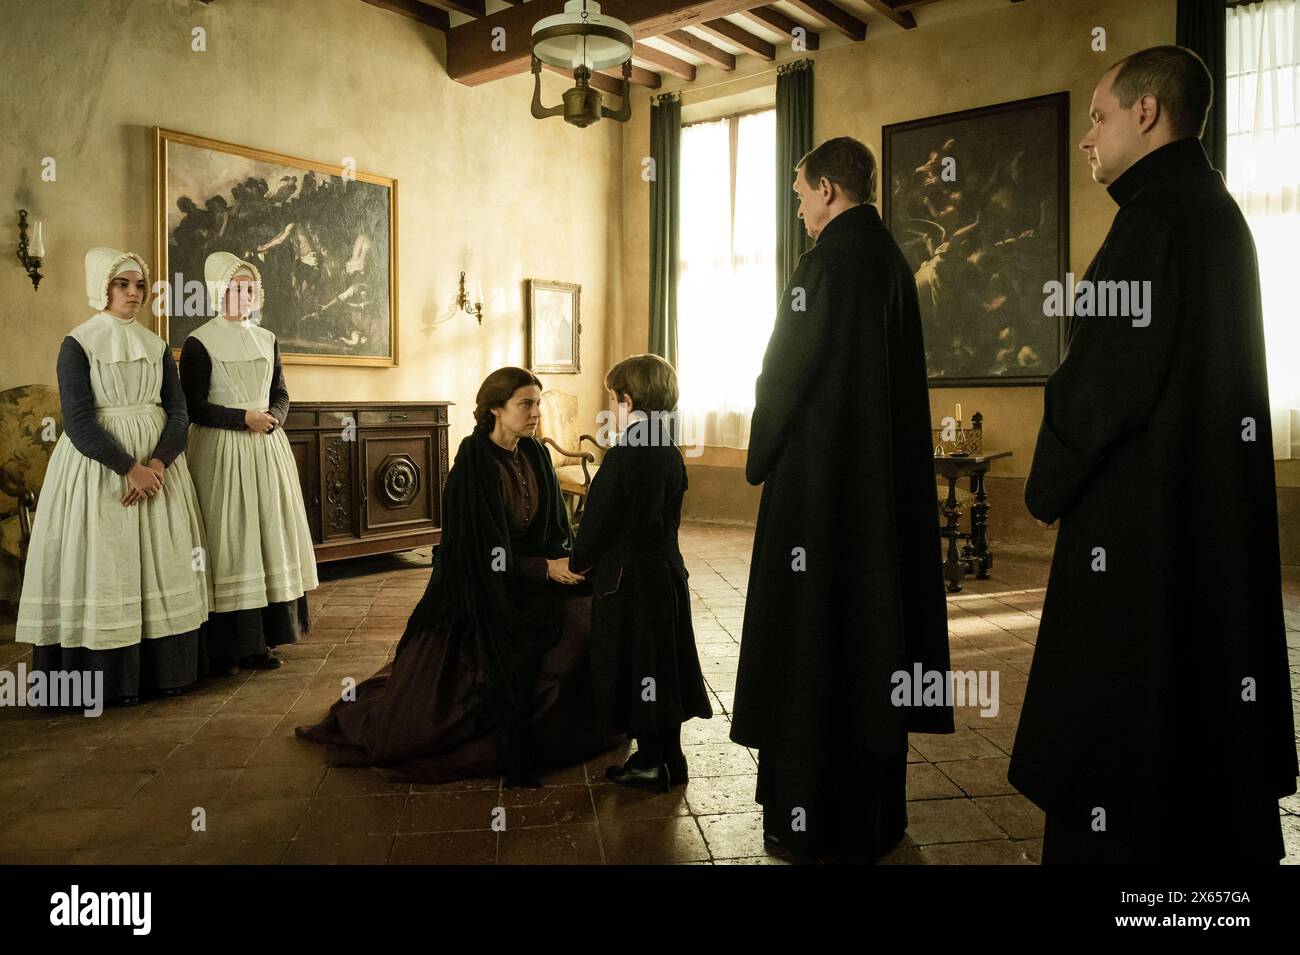 Kidnapped: The Abduction of Edgardo Mortara (2022) directed by Marco Bellocchio and starring Paolo Pierobon, Fausto Russo Alesi and Barbara Ronchi. Adaptation of Daniele Scalise's novel about a Jewish boy who is kidnapped and converted to Catholicism in 1858. Publicity photograph.***EDITORIAL USE ONLY*** Credit: BFA / Anna Camerlingo / Cohen Media Group Stock Photo